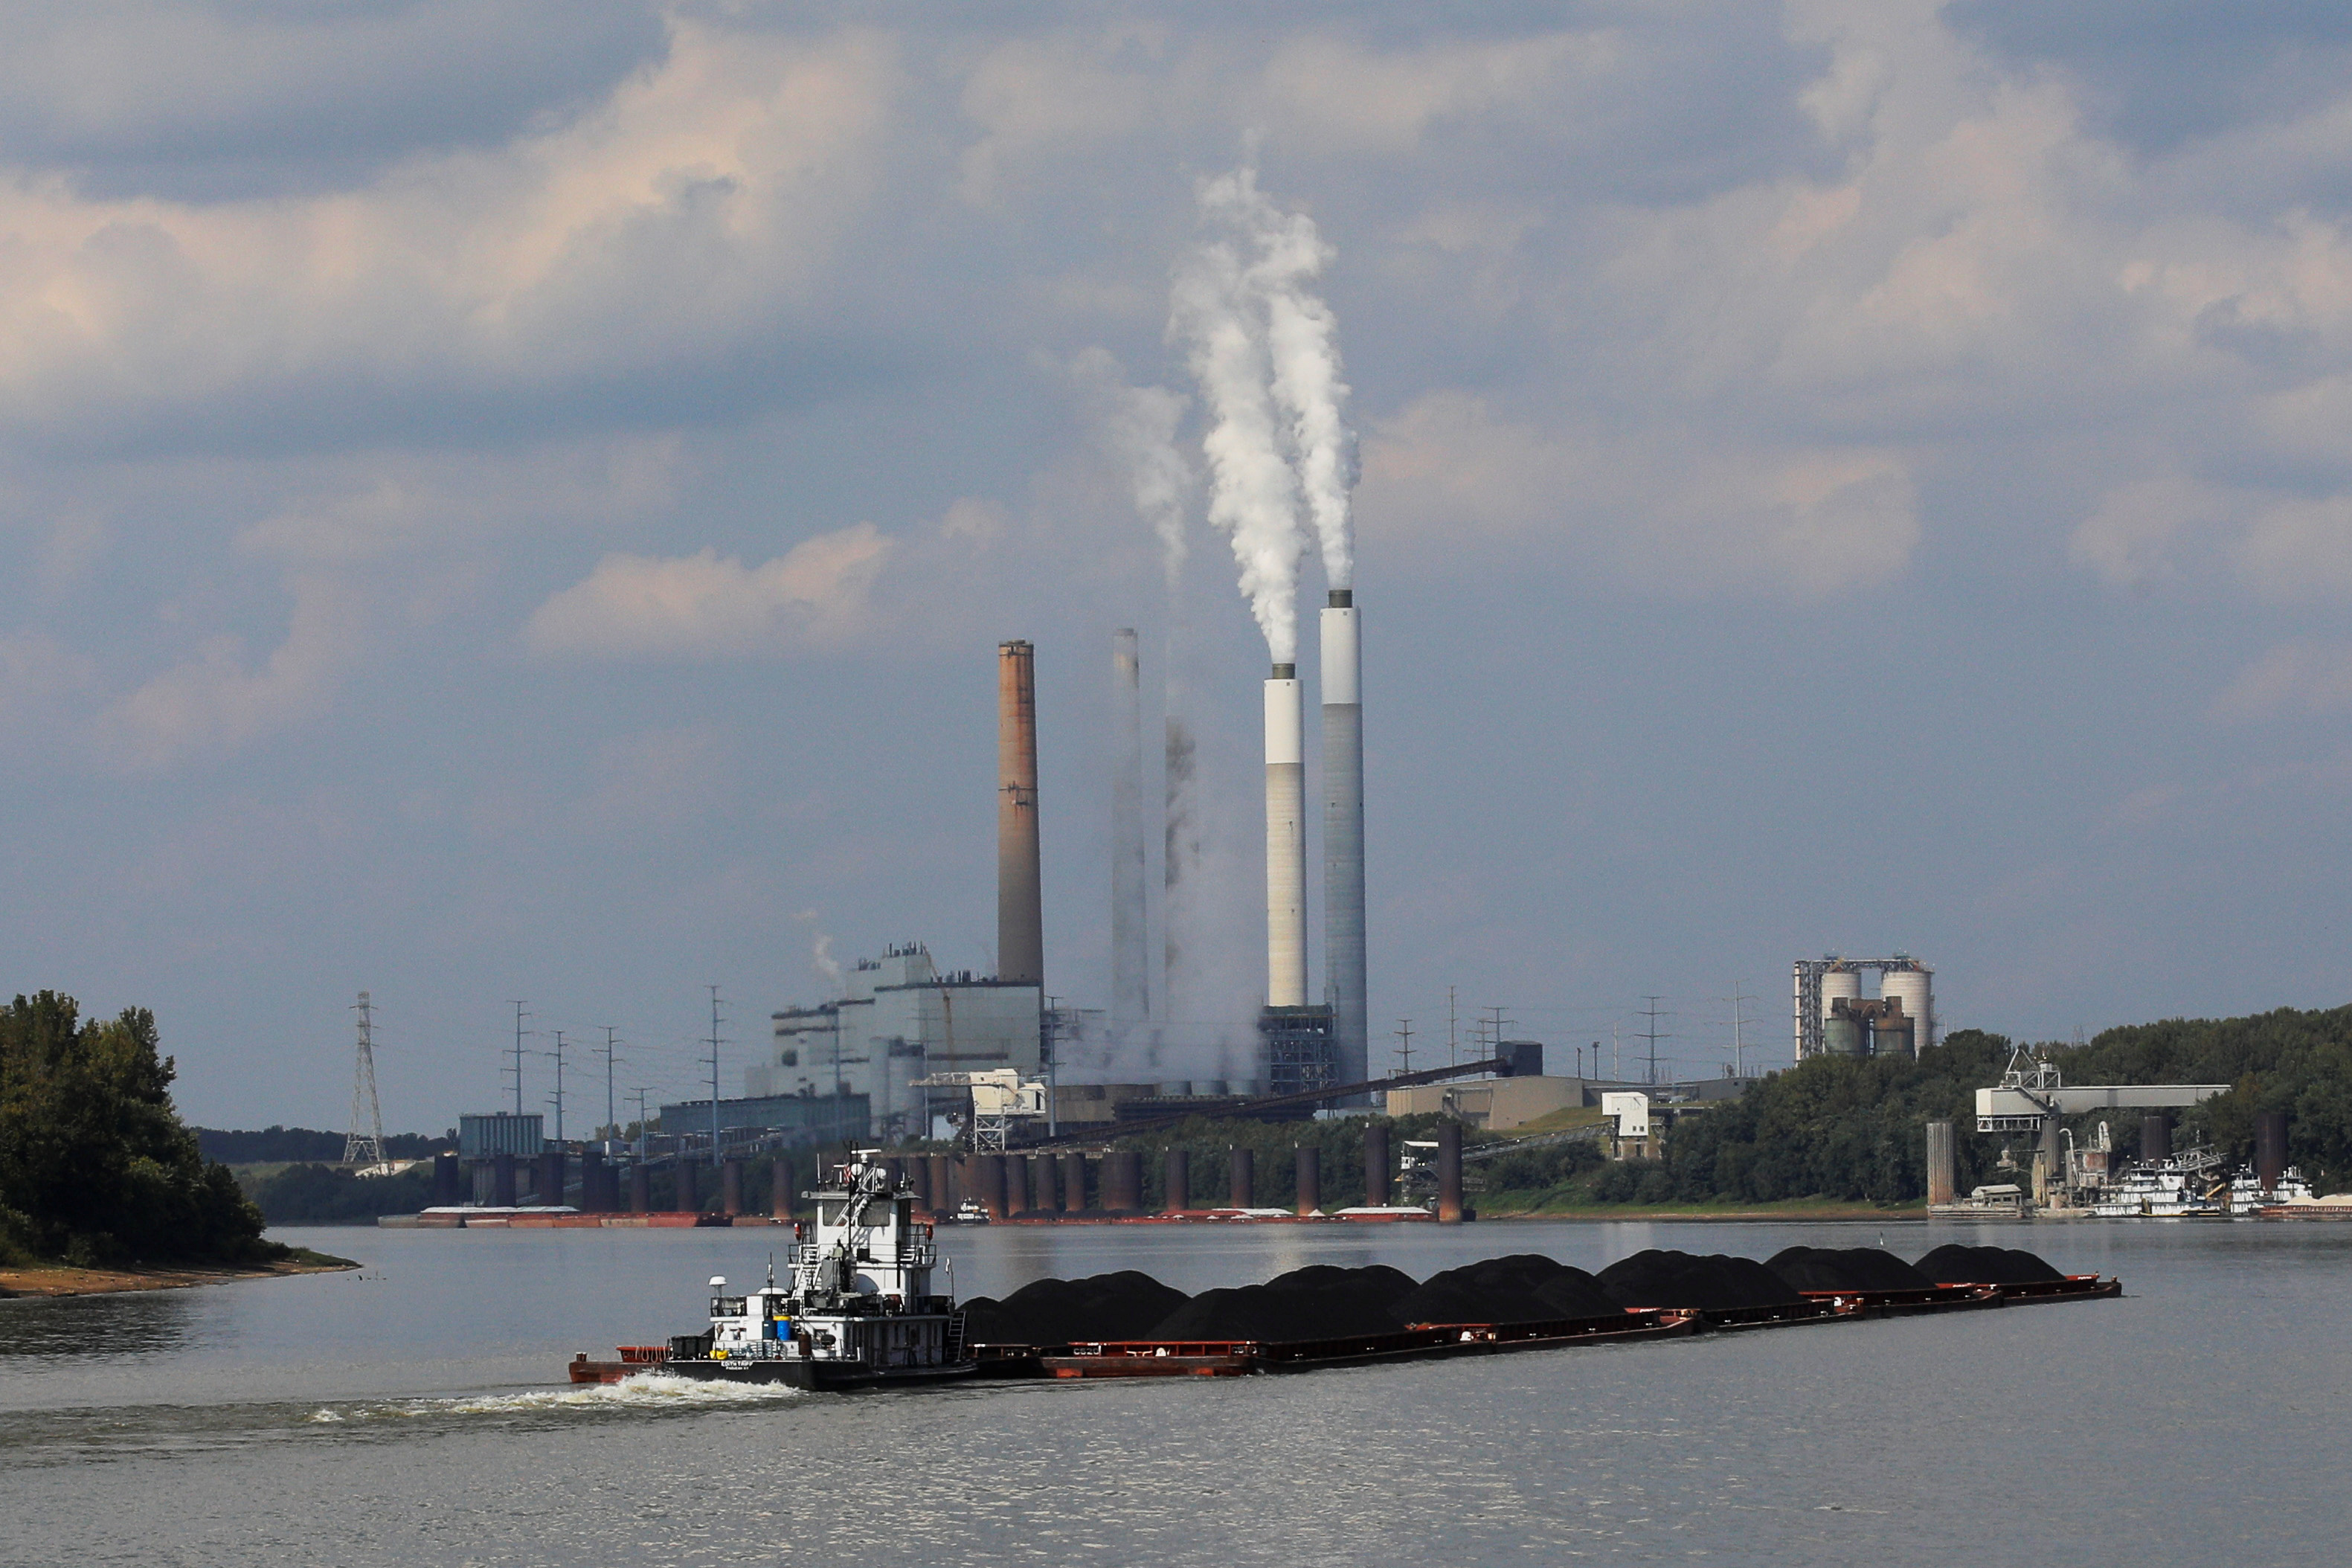 A towboat pushes barges towards the Mill Creek Station power plant on the Ohio River in Louisville